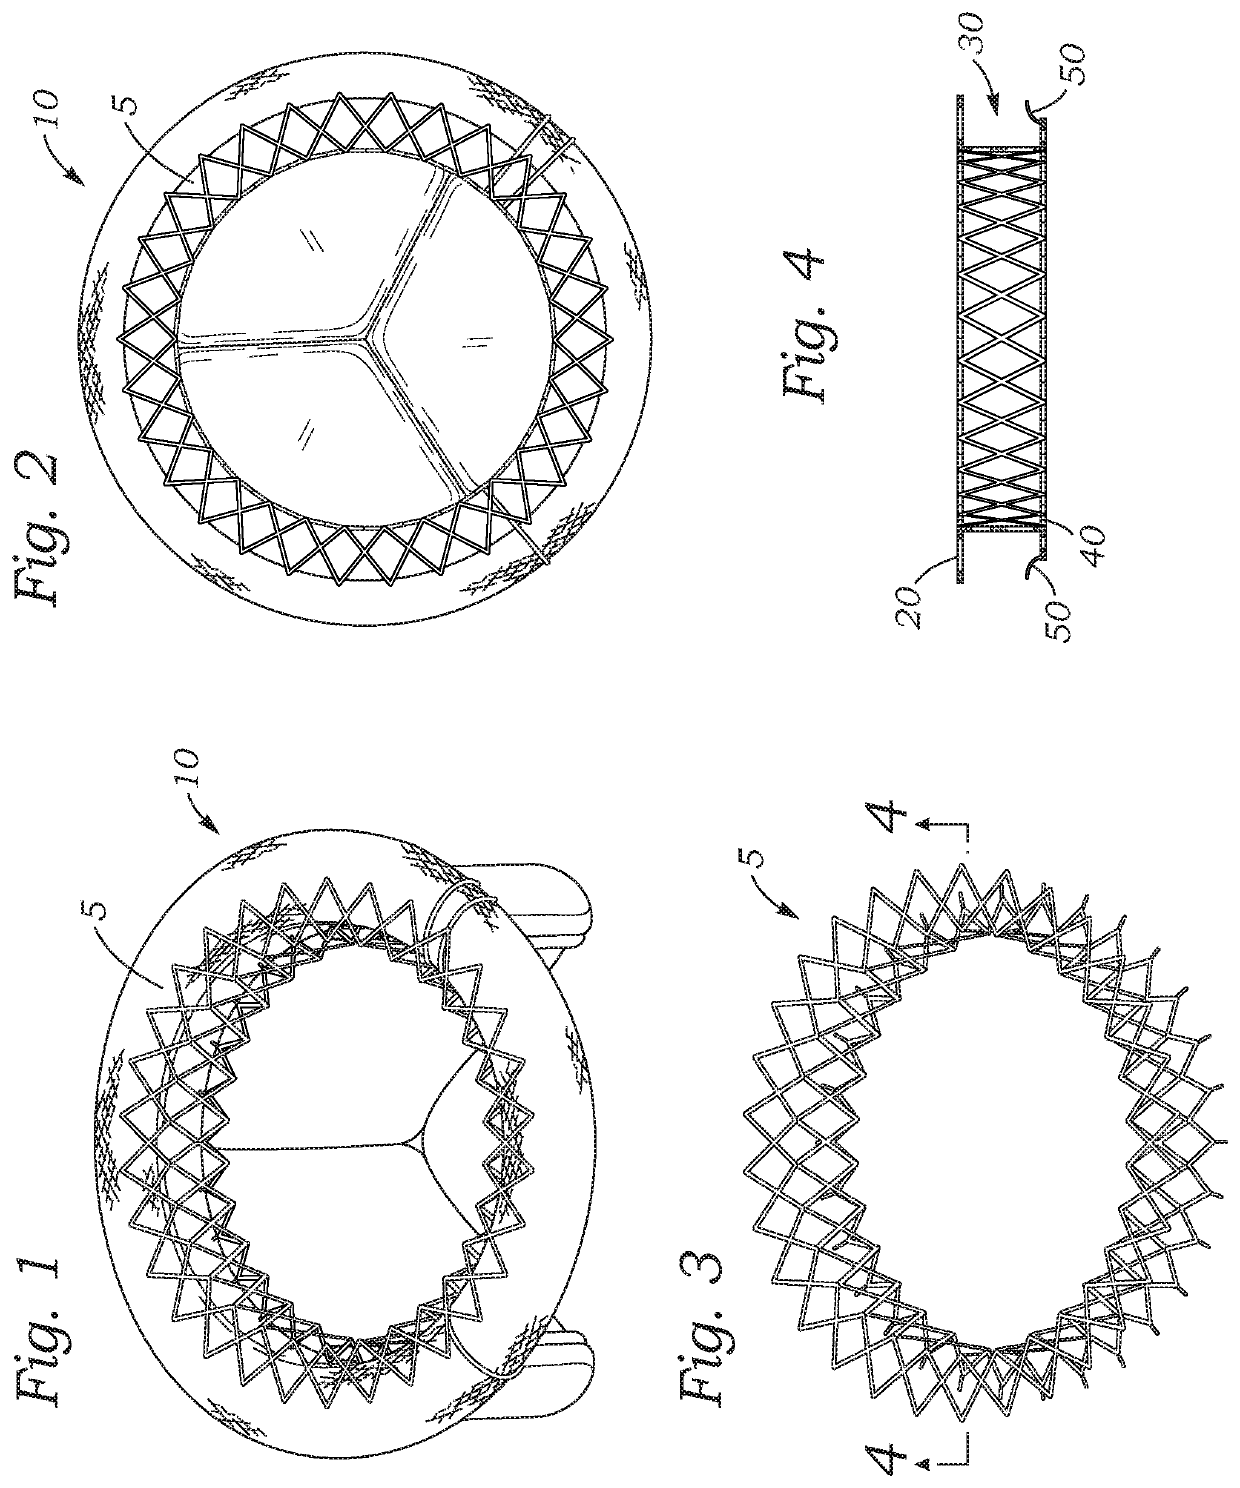 Methods for securing a transcatheter valve to a bioprosthetic cardiac structure